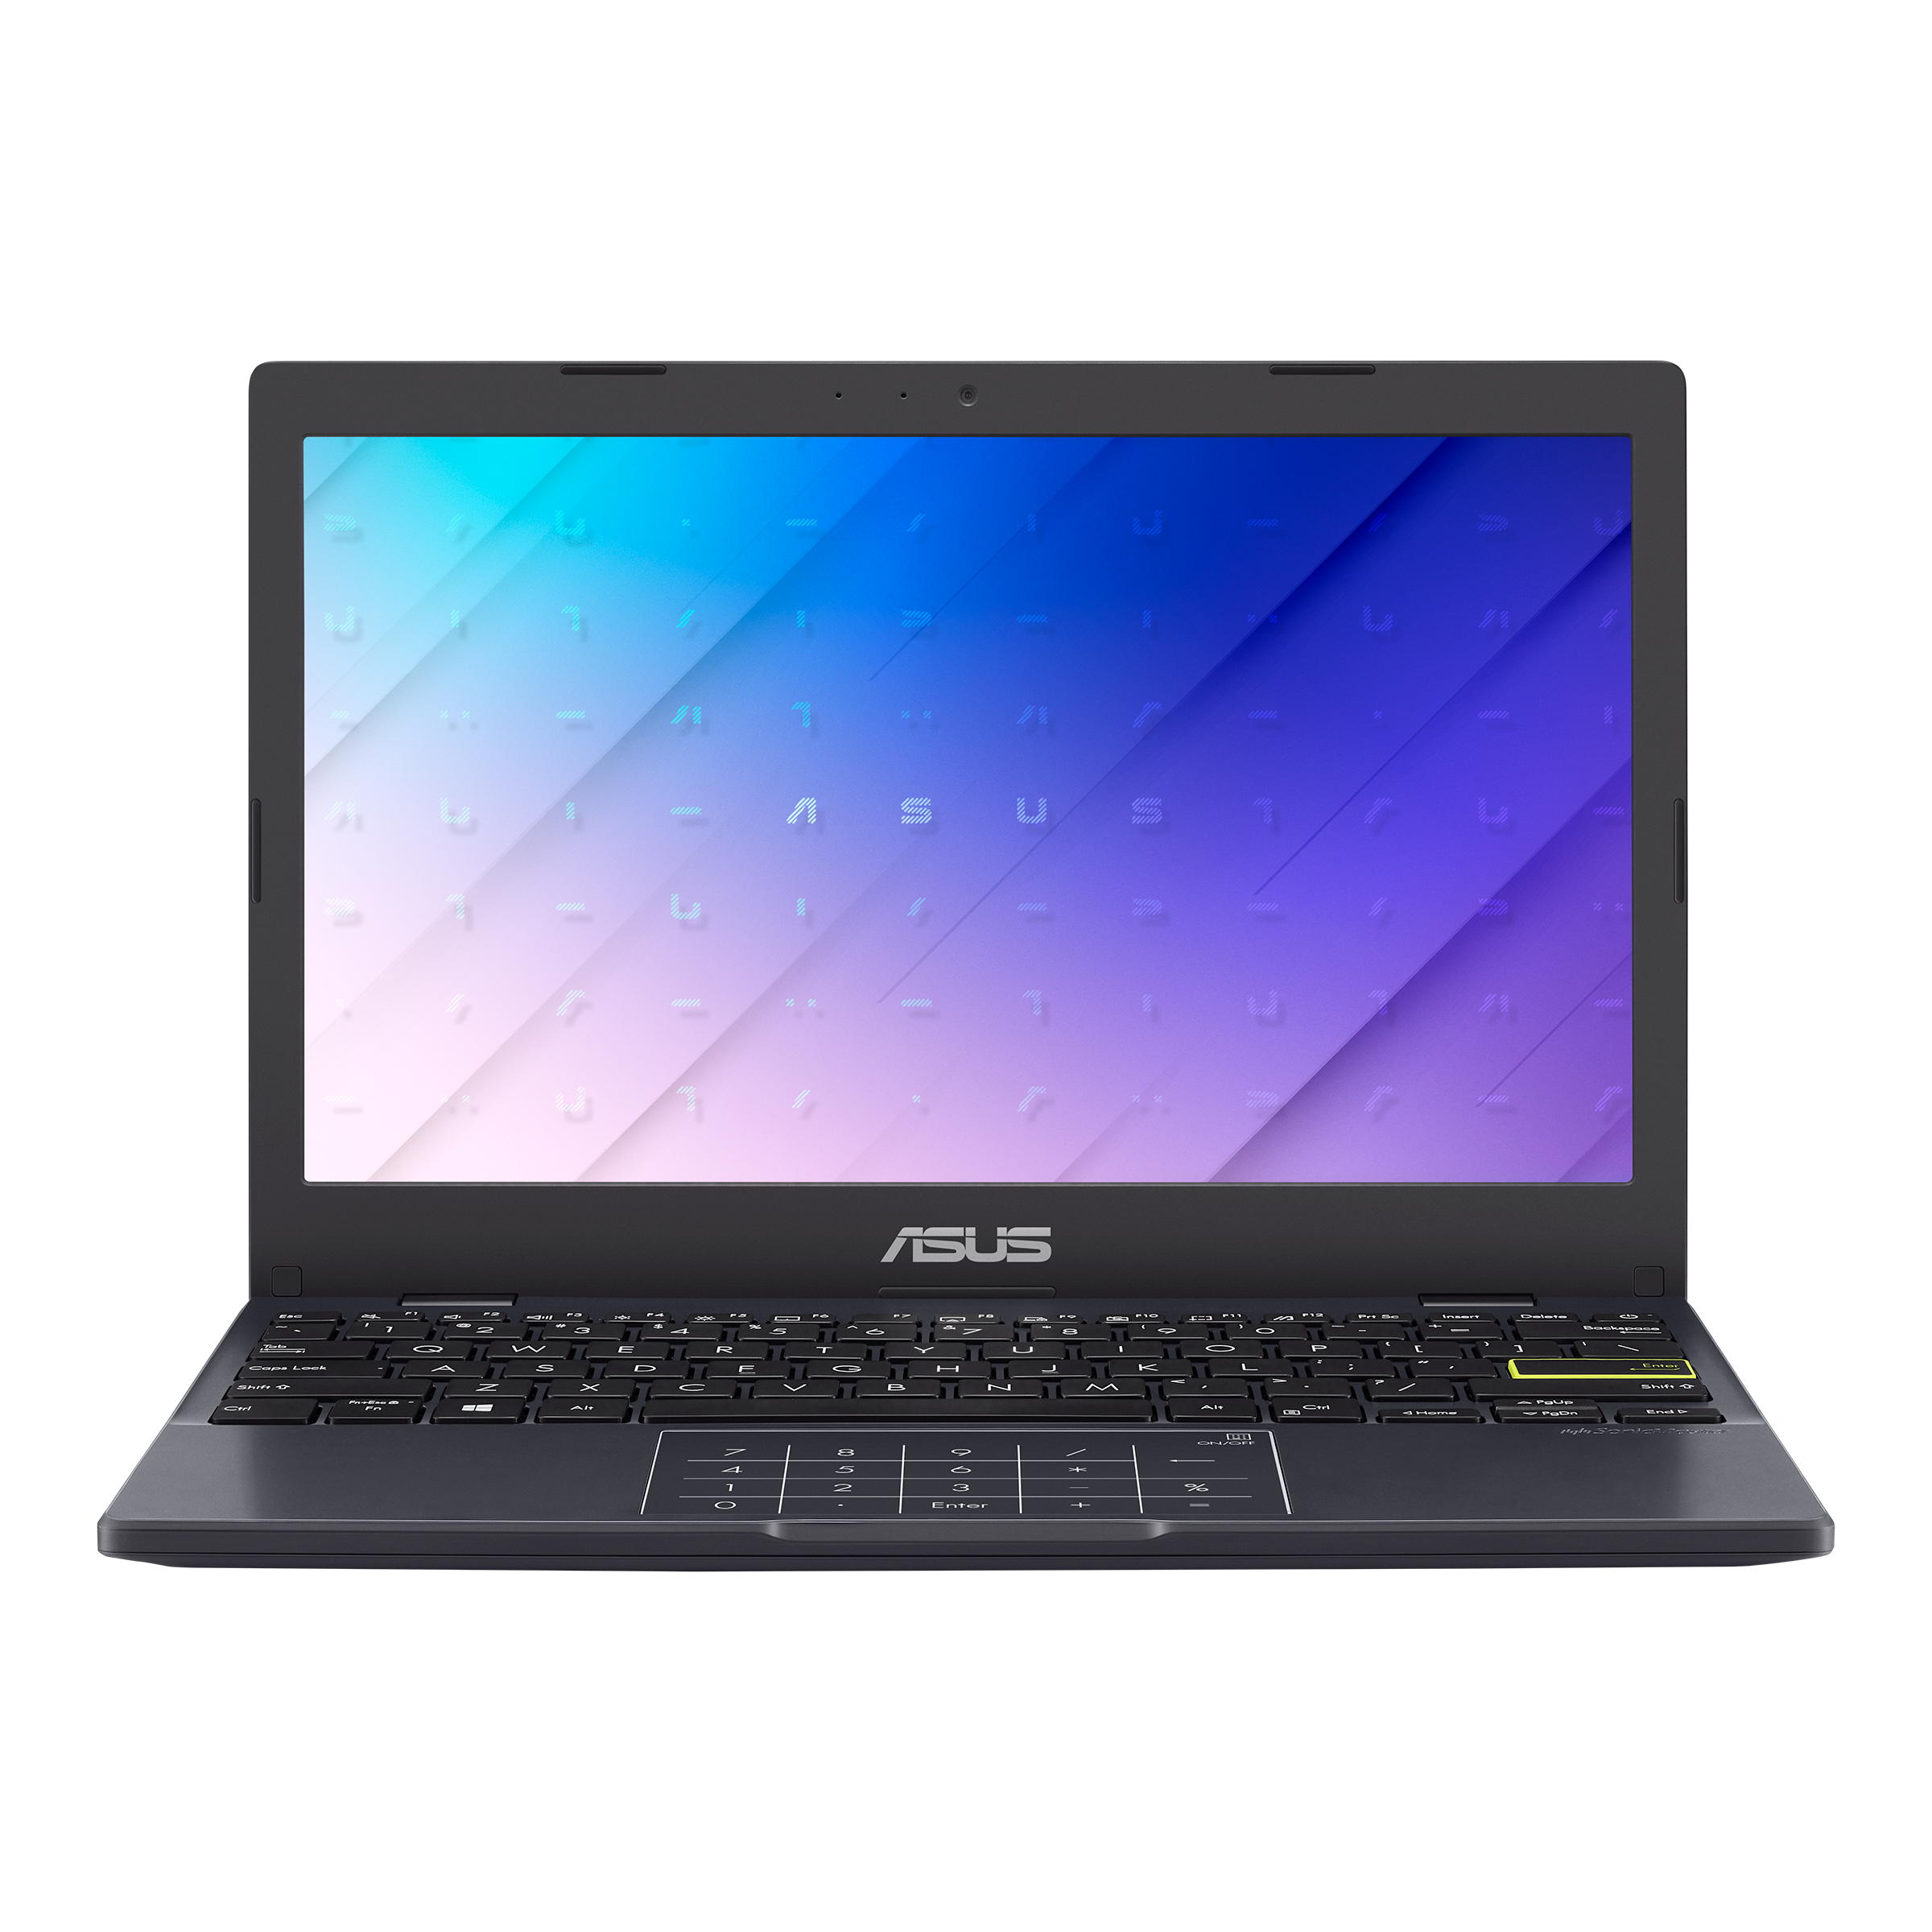 ASUS L210｜Laptops For Home｜ASUS USA